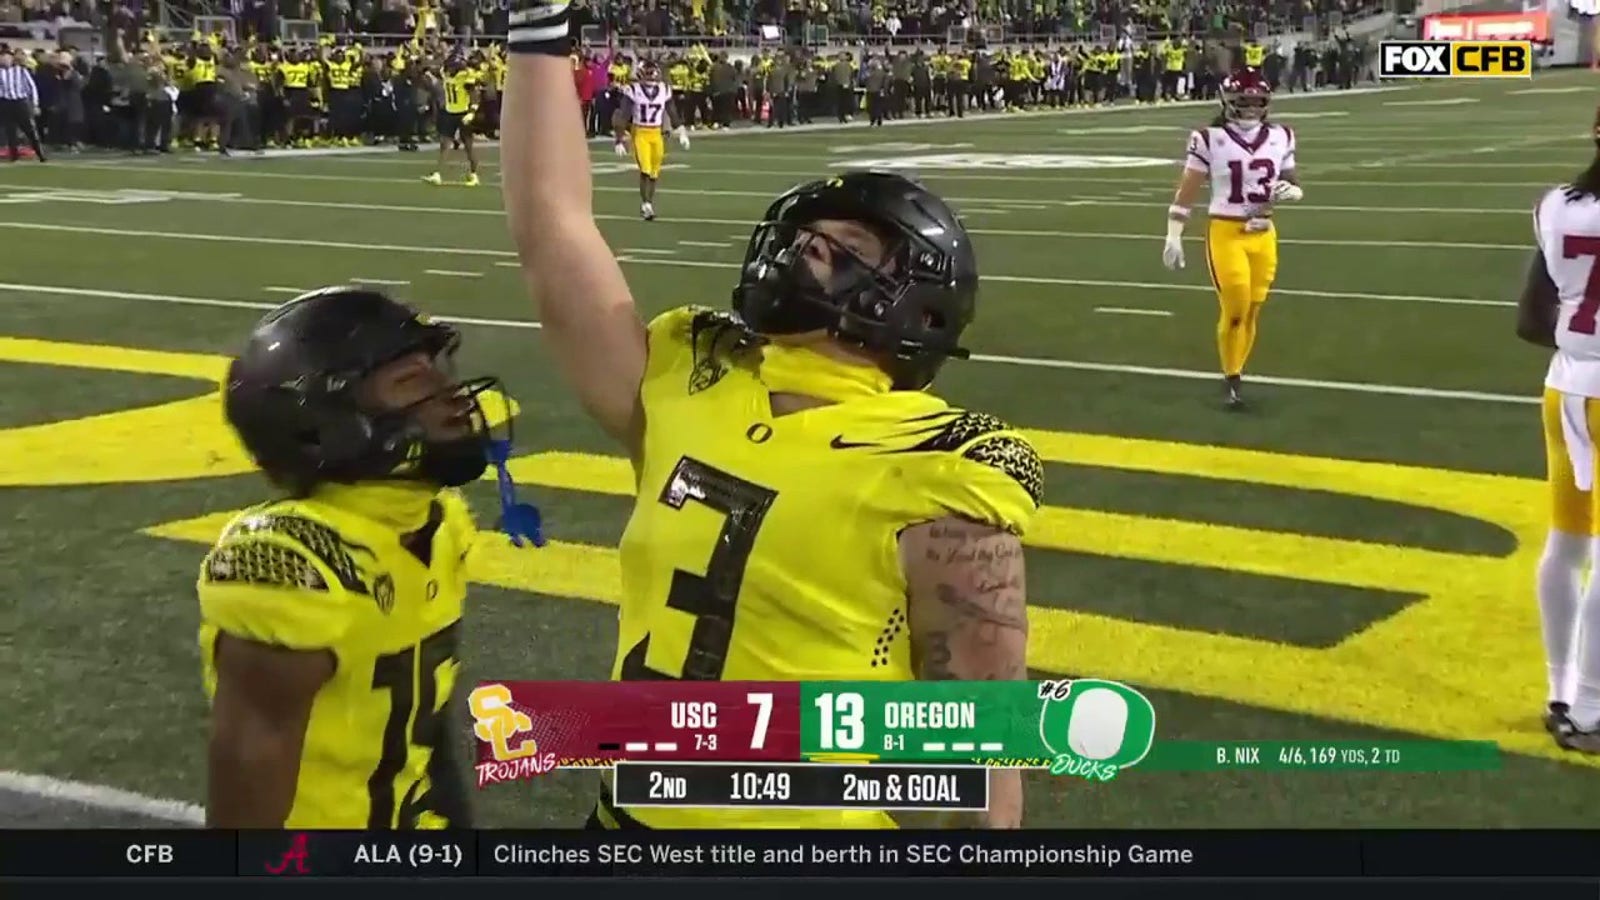 Bo Nix finds Terrance Ferguson for a 15-yard touchdown as Oregon extends their lead over USC